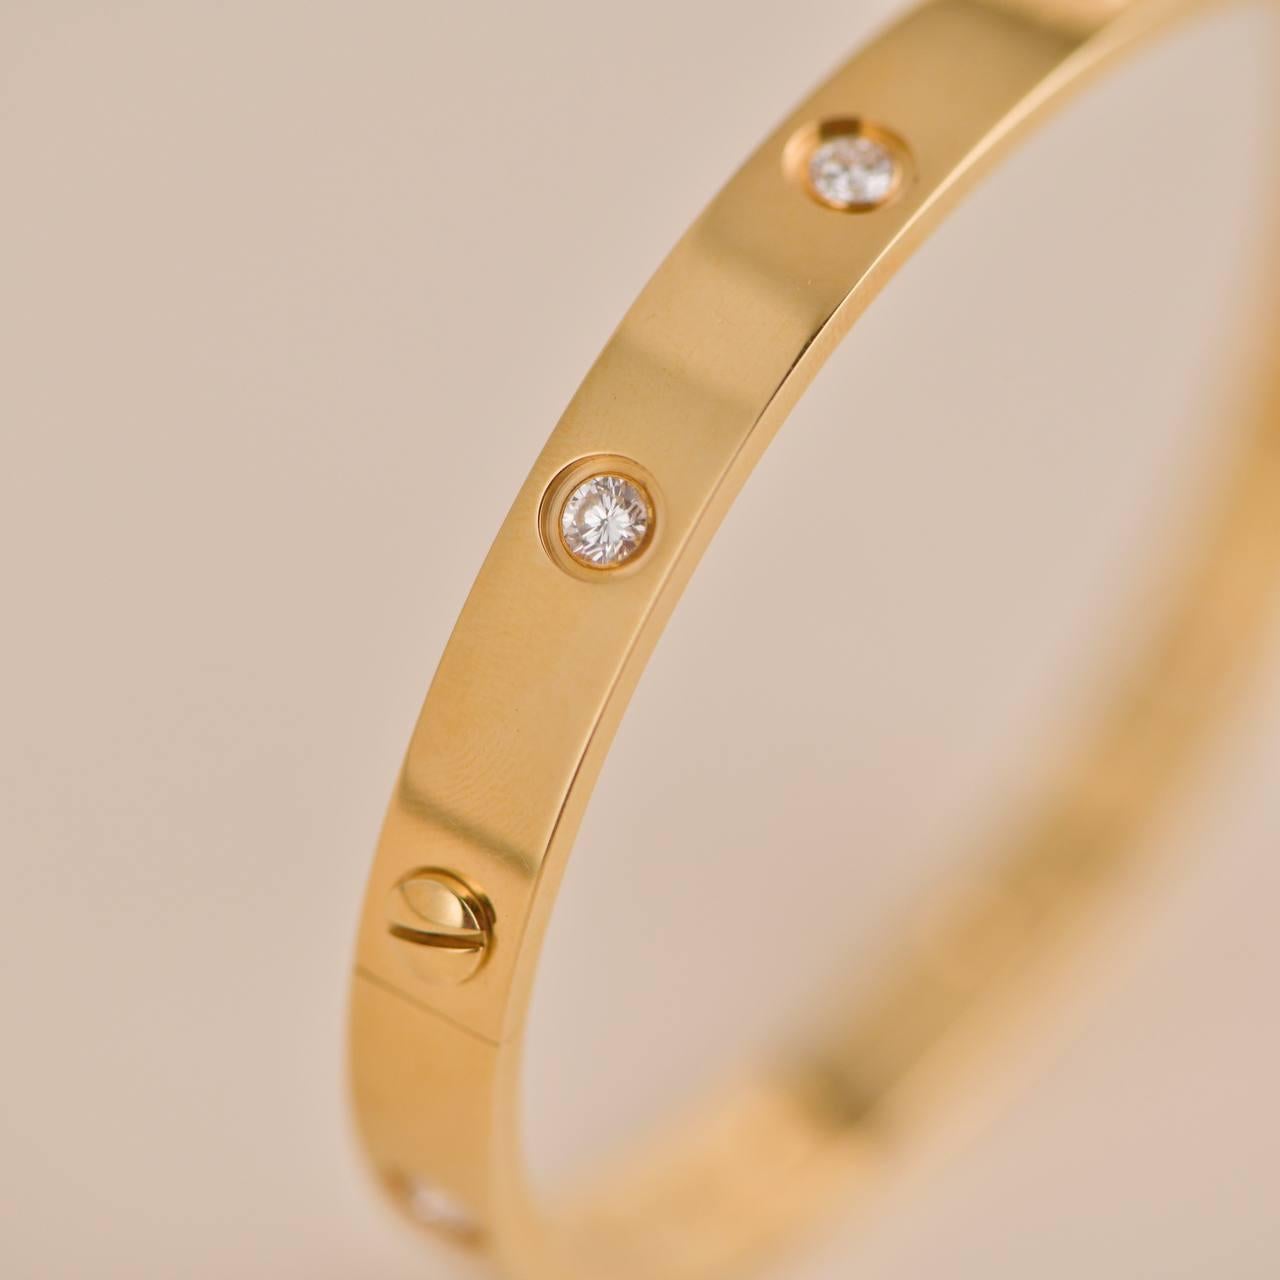 Cartier Love Bracelet 10 Diamonds Yellow Gold Size 17 In Excellent Condition For Sale In Banbury, GB